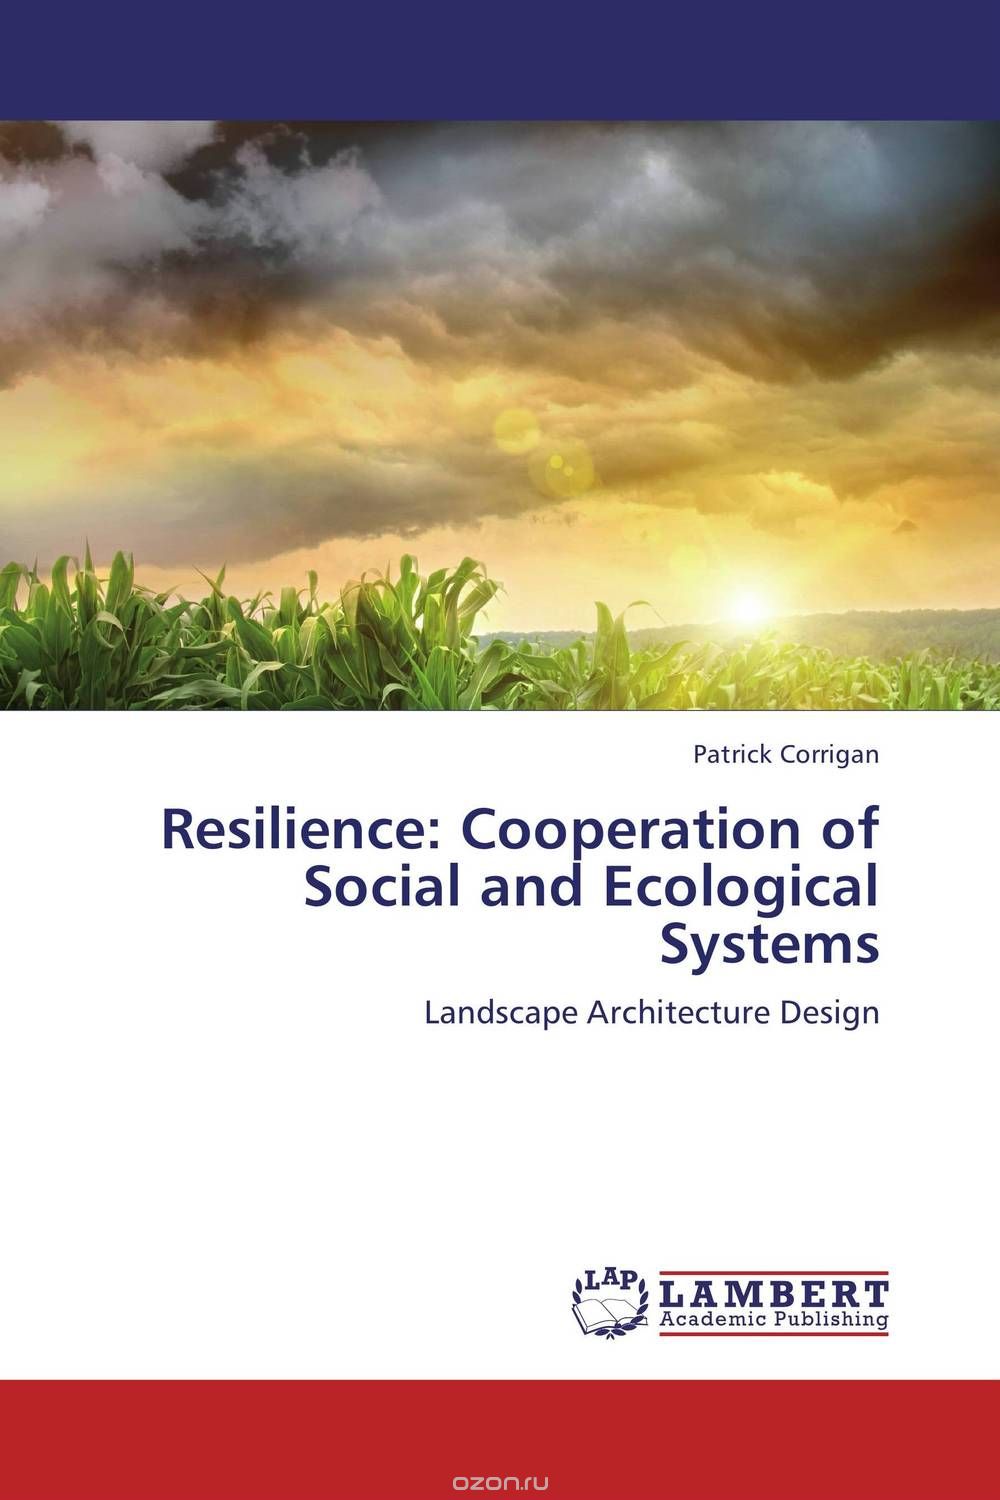 Скачать книгу "Resilience: Cooperation of Social and Ecological Systems"